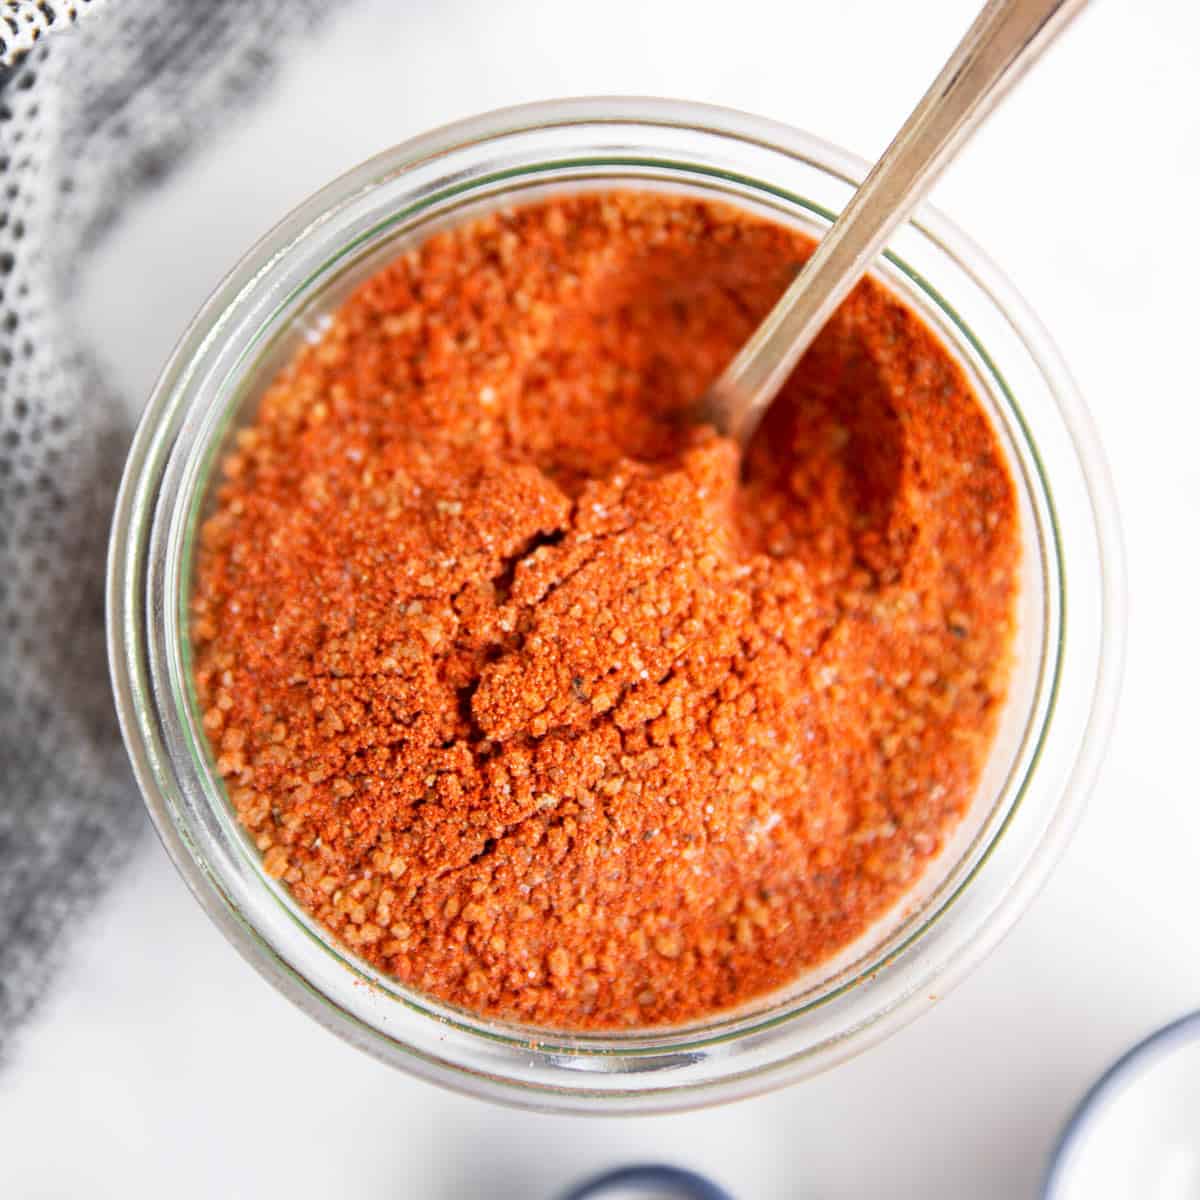 Pulled Pork Rub Recipe {Sweet and Spicy Homemade Spice Mix}